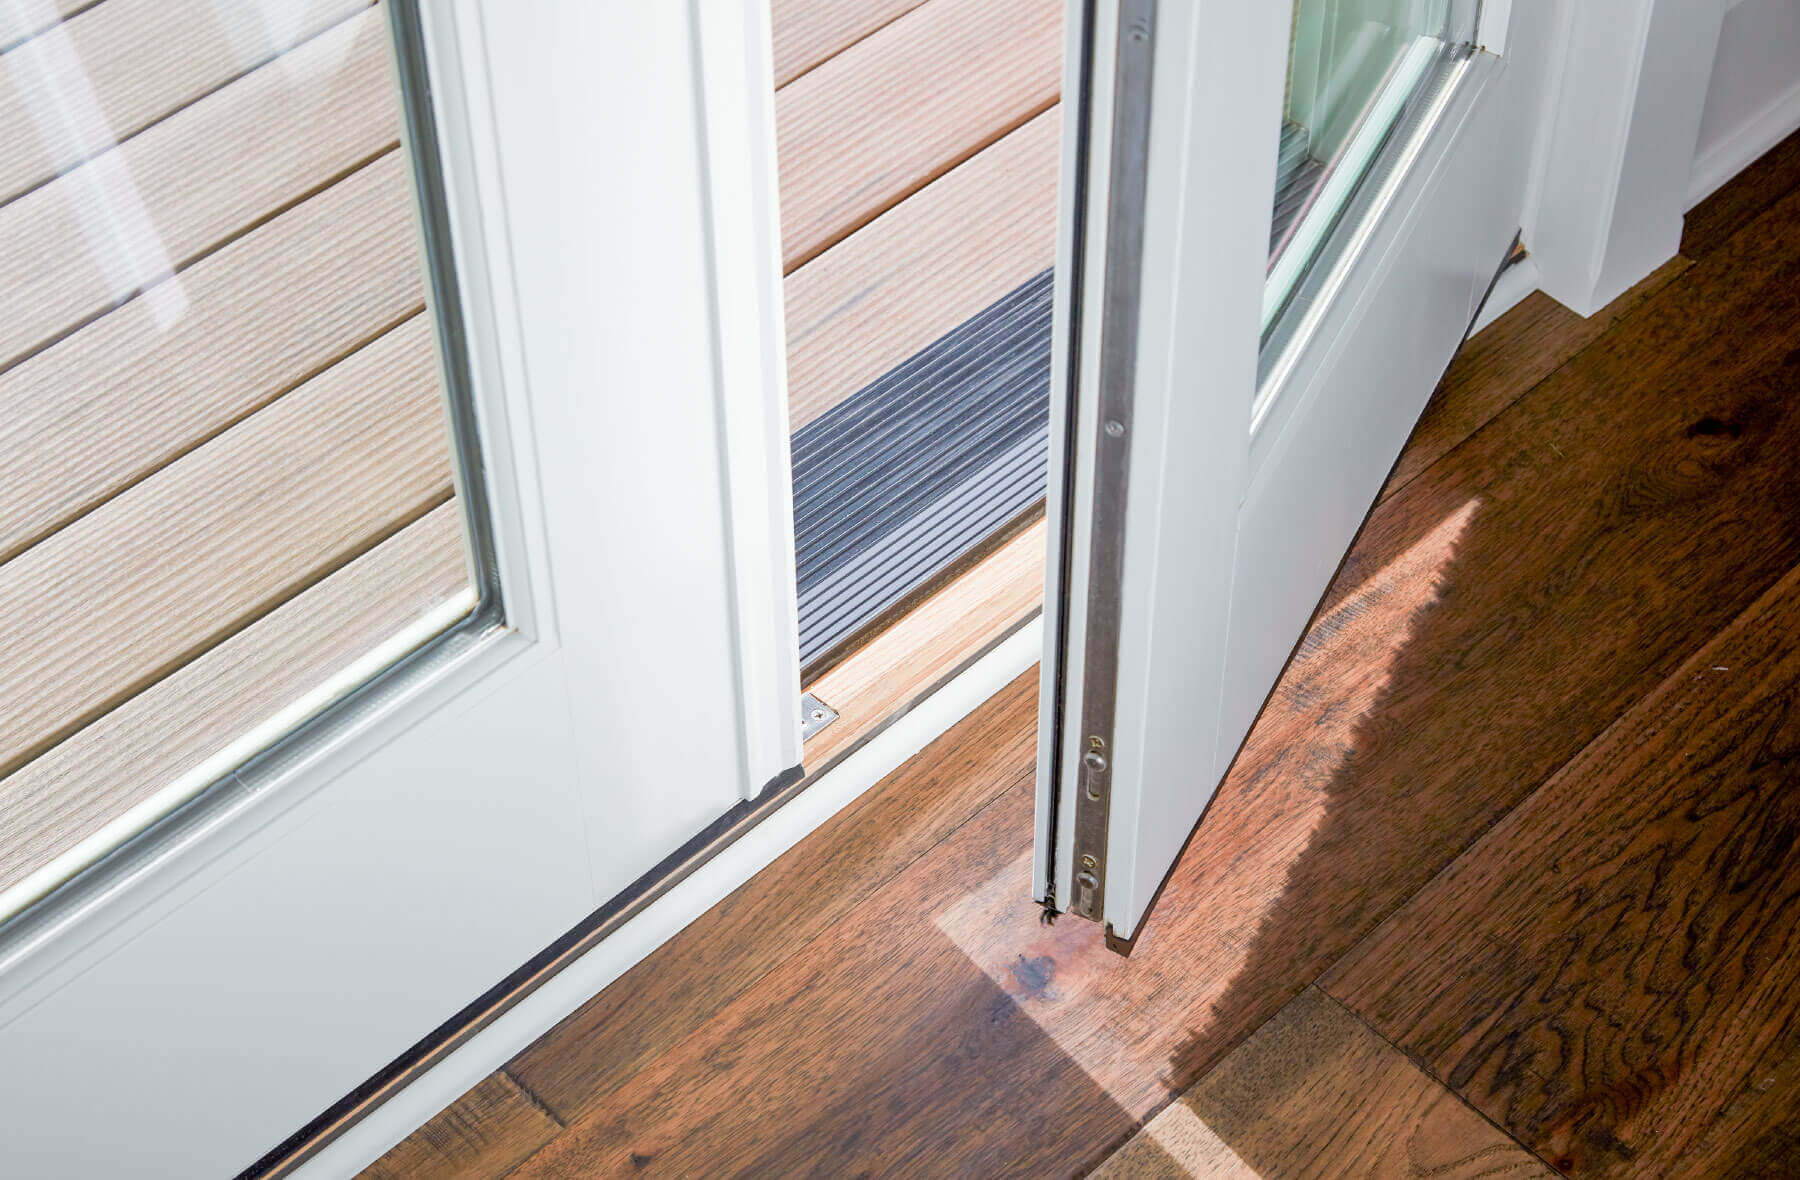 Replace Threshold Exterior French Doors The Swampthang